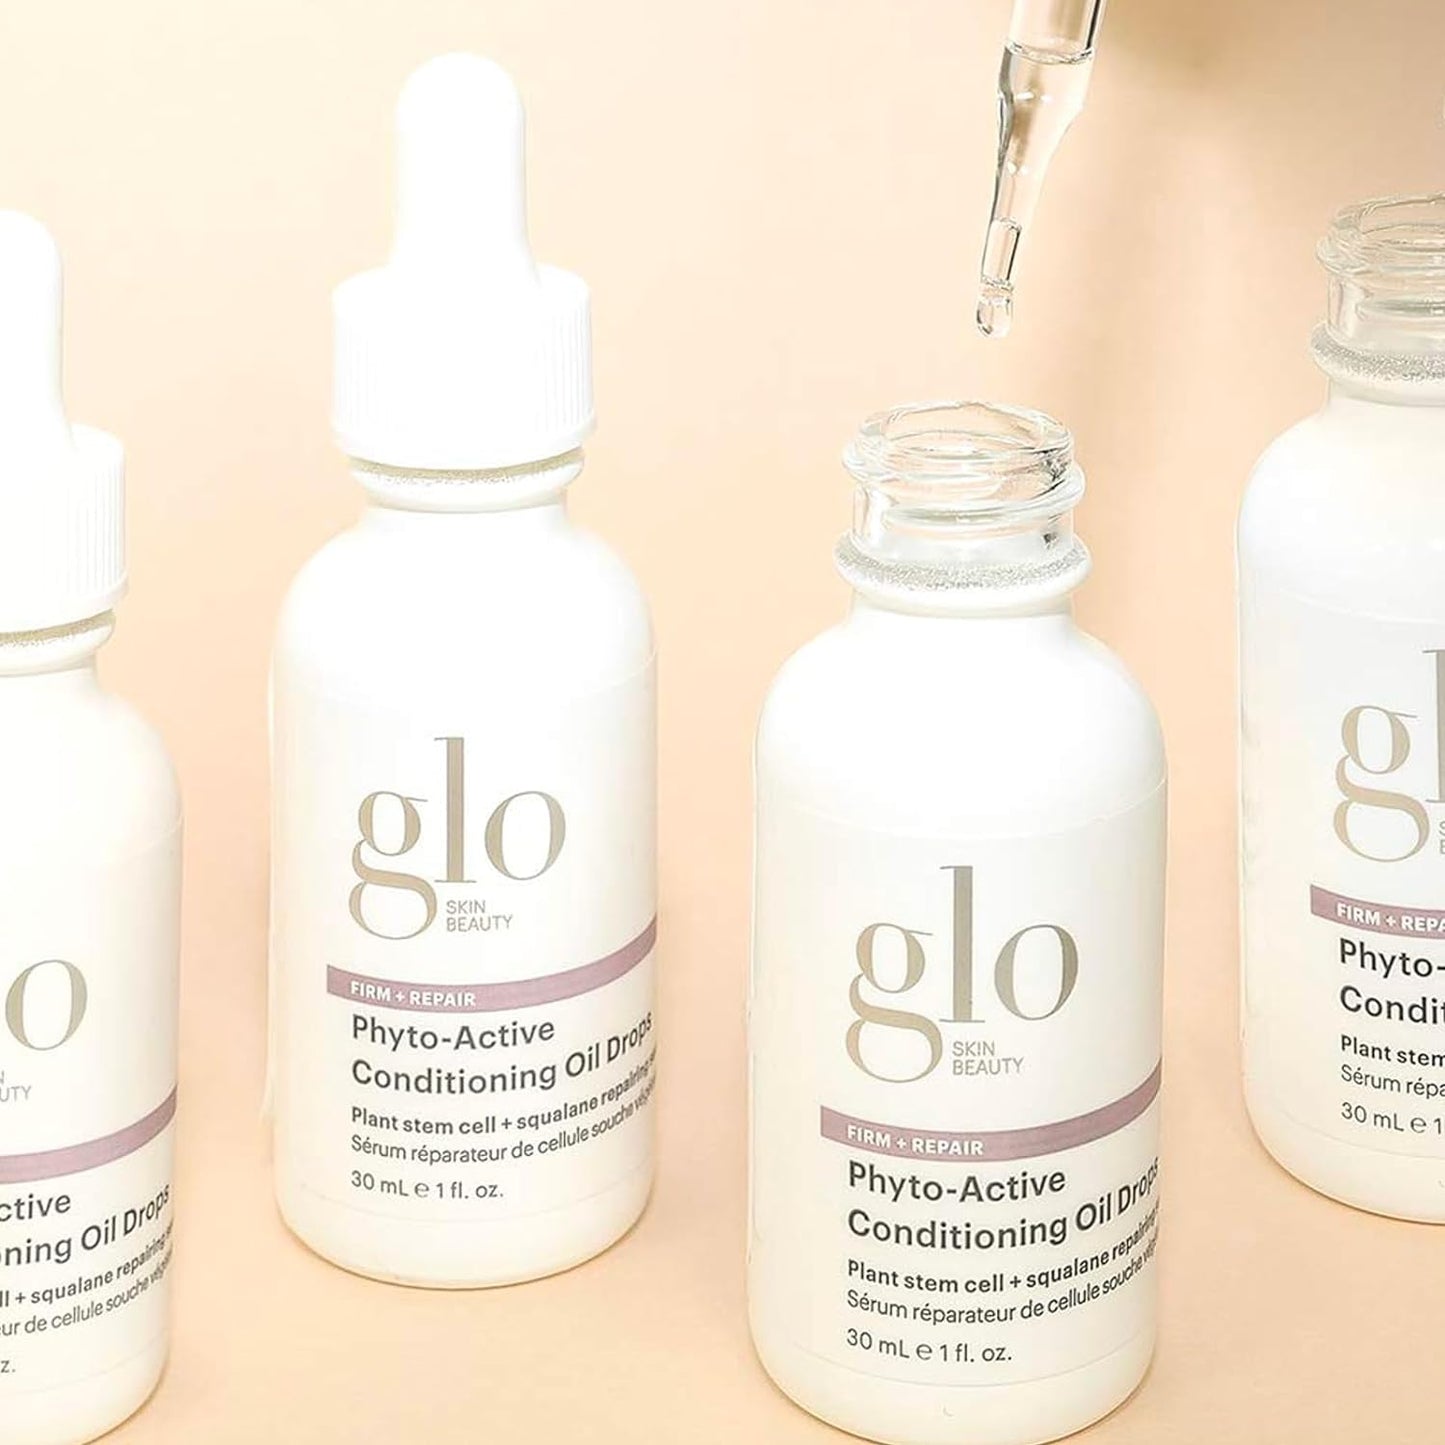 Glo Skin Beauty Phyto-Active Conditioning Oil Drops | Rejuvenate and Repair Skin’s Natural Elasticity